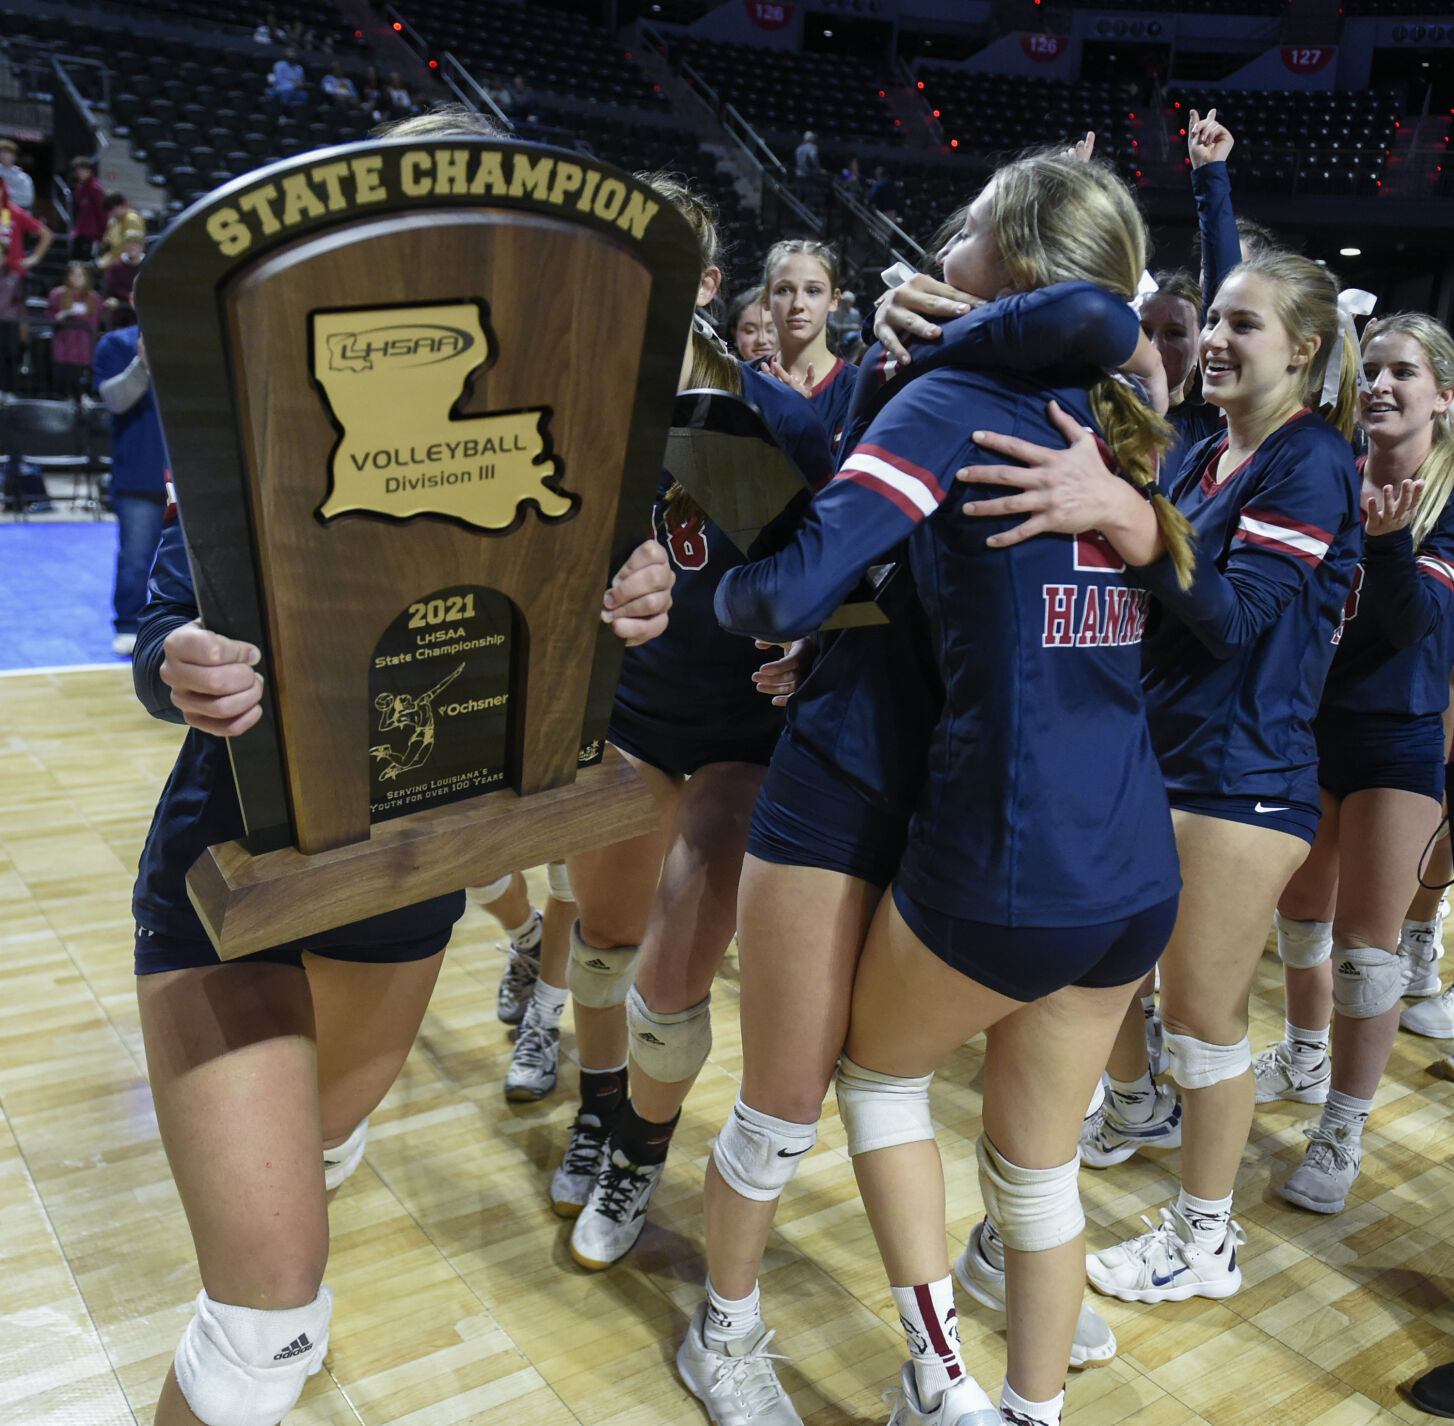 How an early timeout helped Hannan win a 2nd volleyball championship in a row